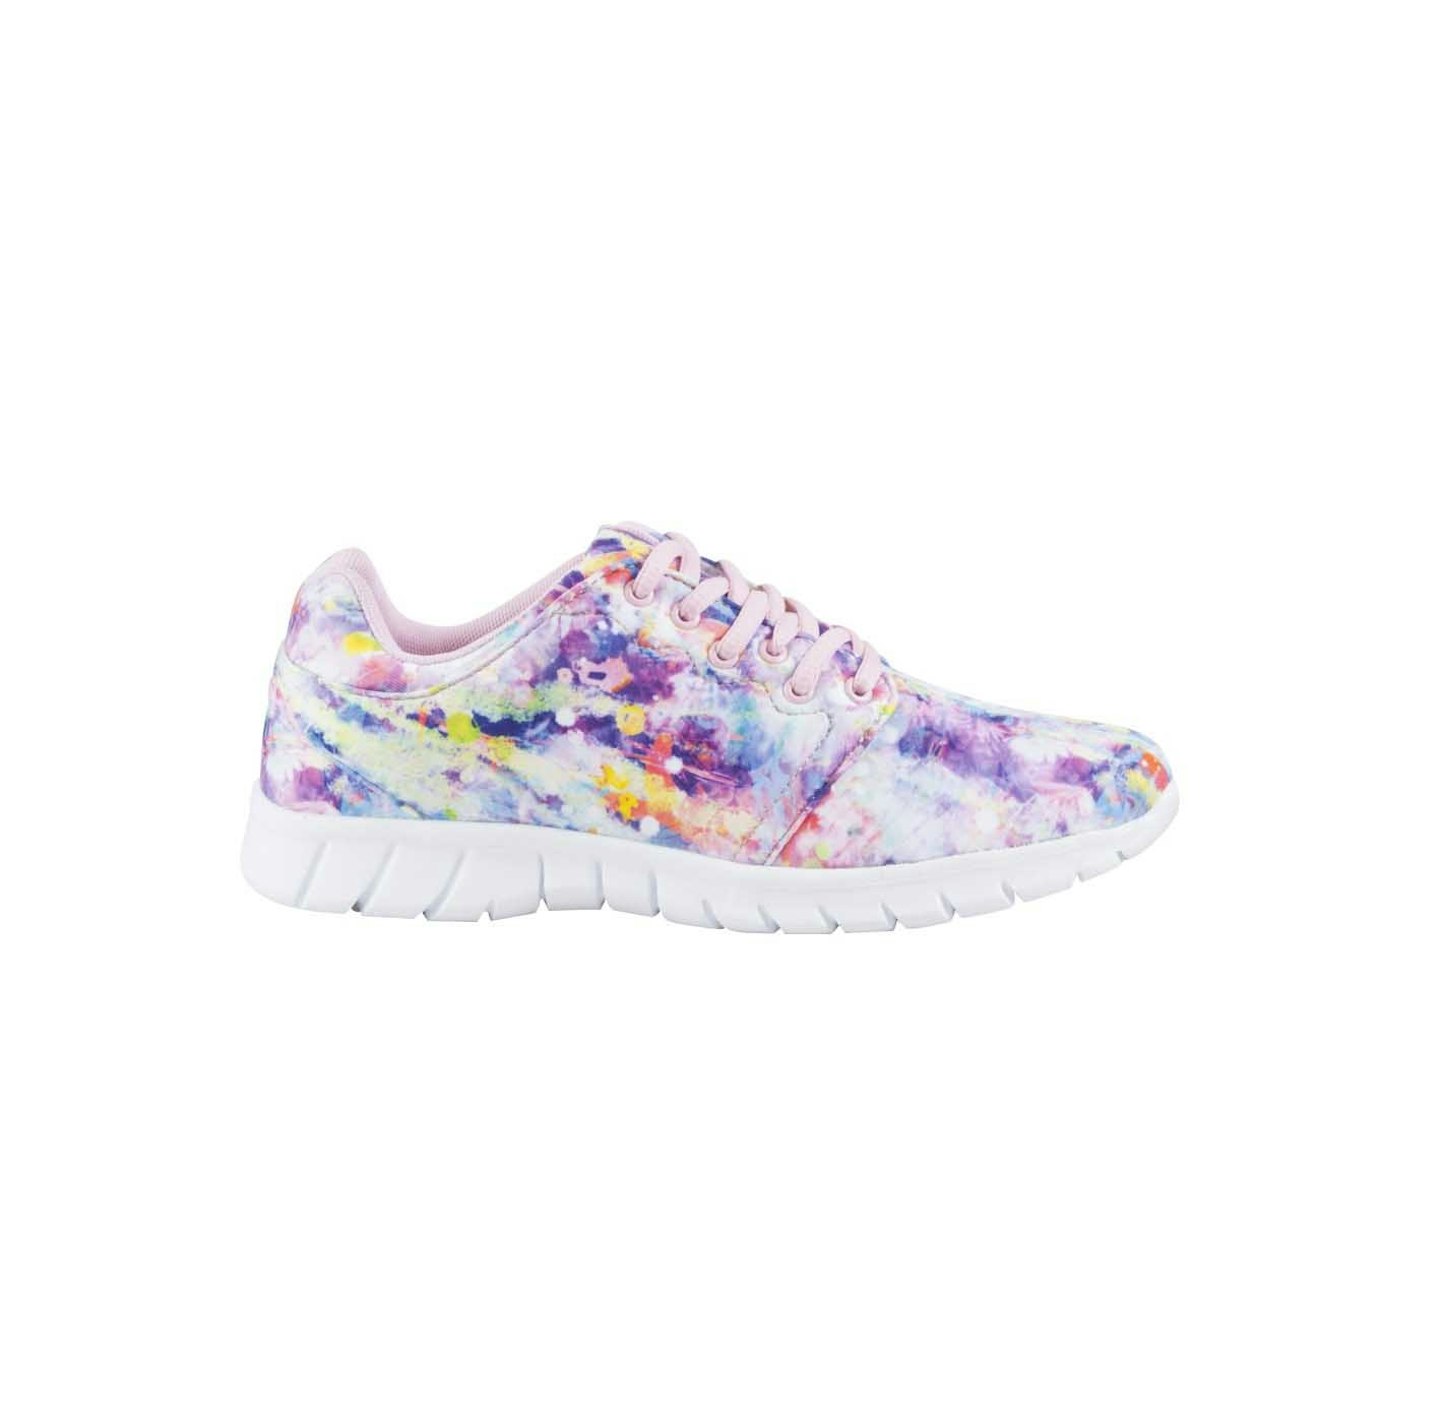 Printed trainers, £18 - we love this design! 